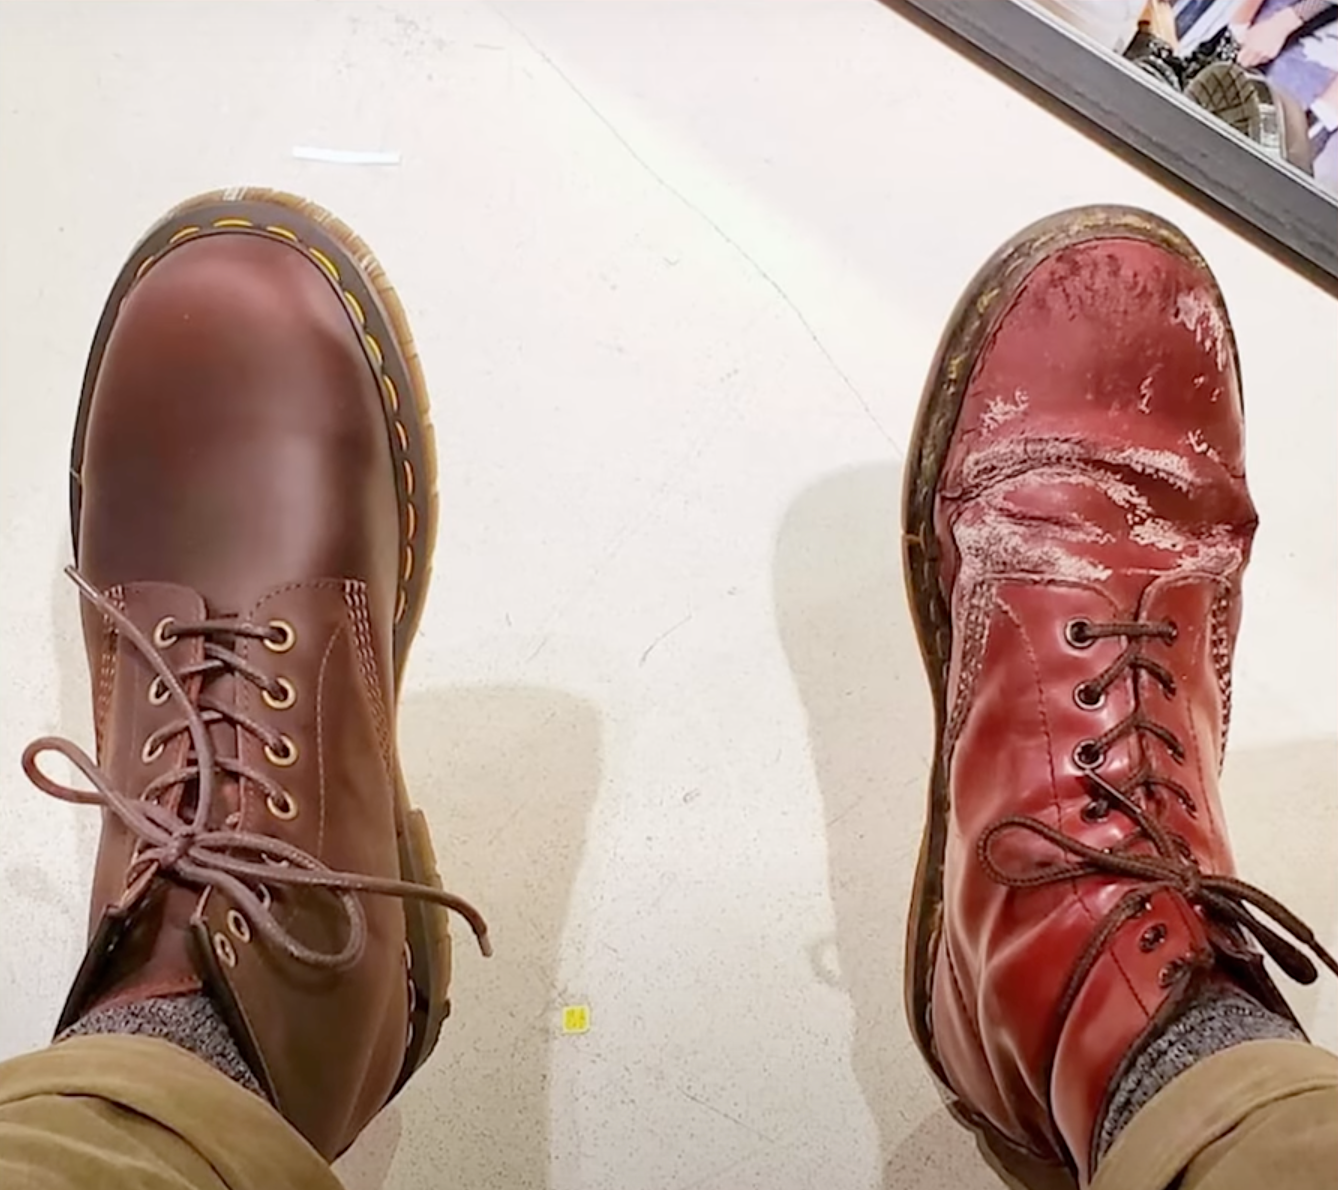 Dr. Martens Red Boots, one new and one old and aged